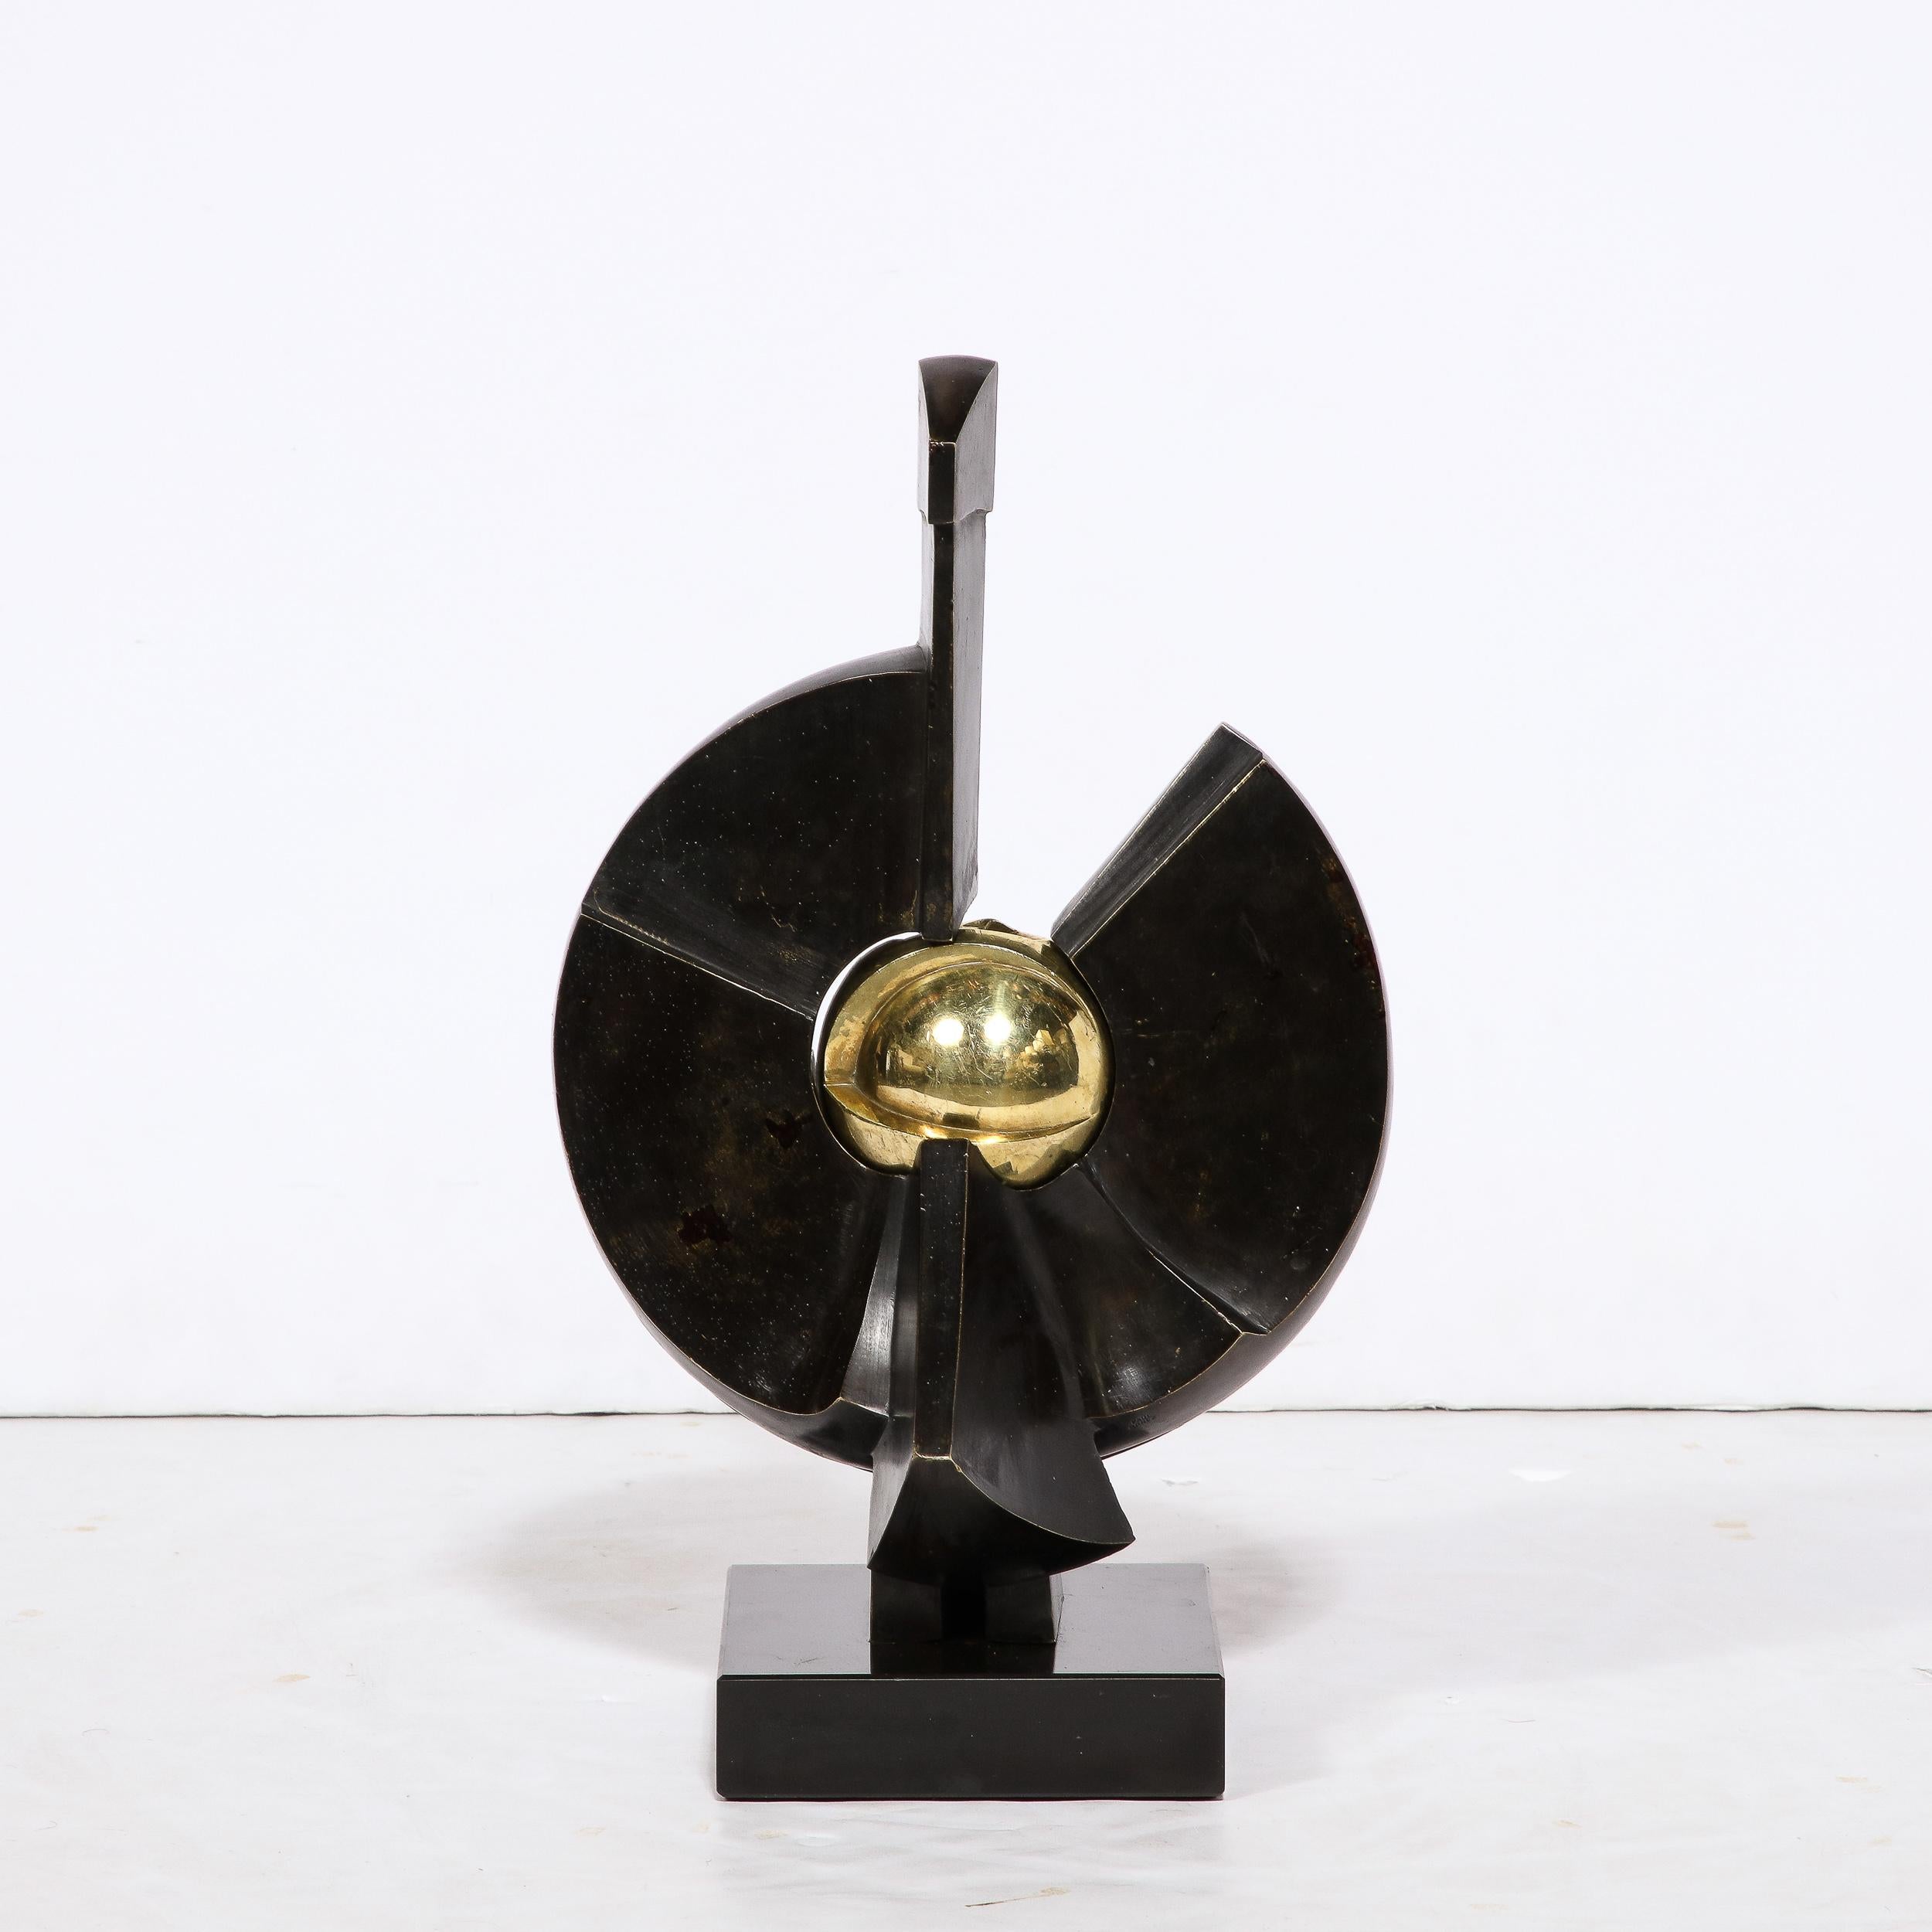 This stunning and graphic modernist sculpture was realized by Paul Gonez in France circa 1980. Realized in the manner of Bernard Rosenthal and other great modernist sculptors of the era, eatures a double patina bronze cast consisting of curvilinear